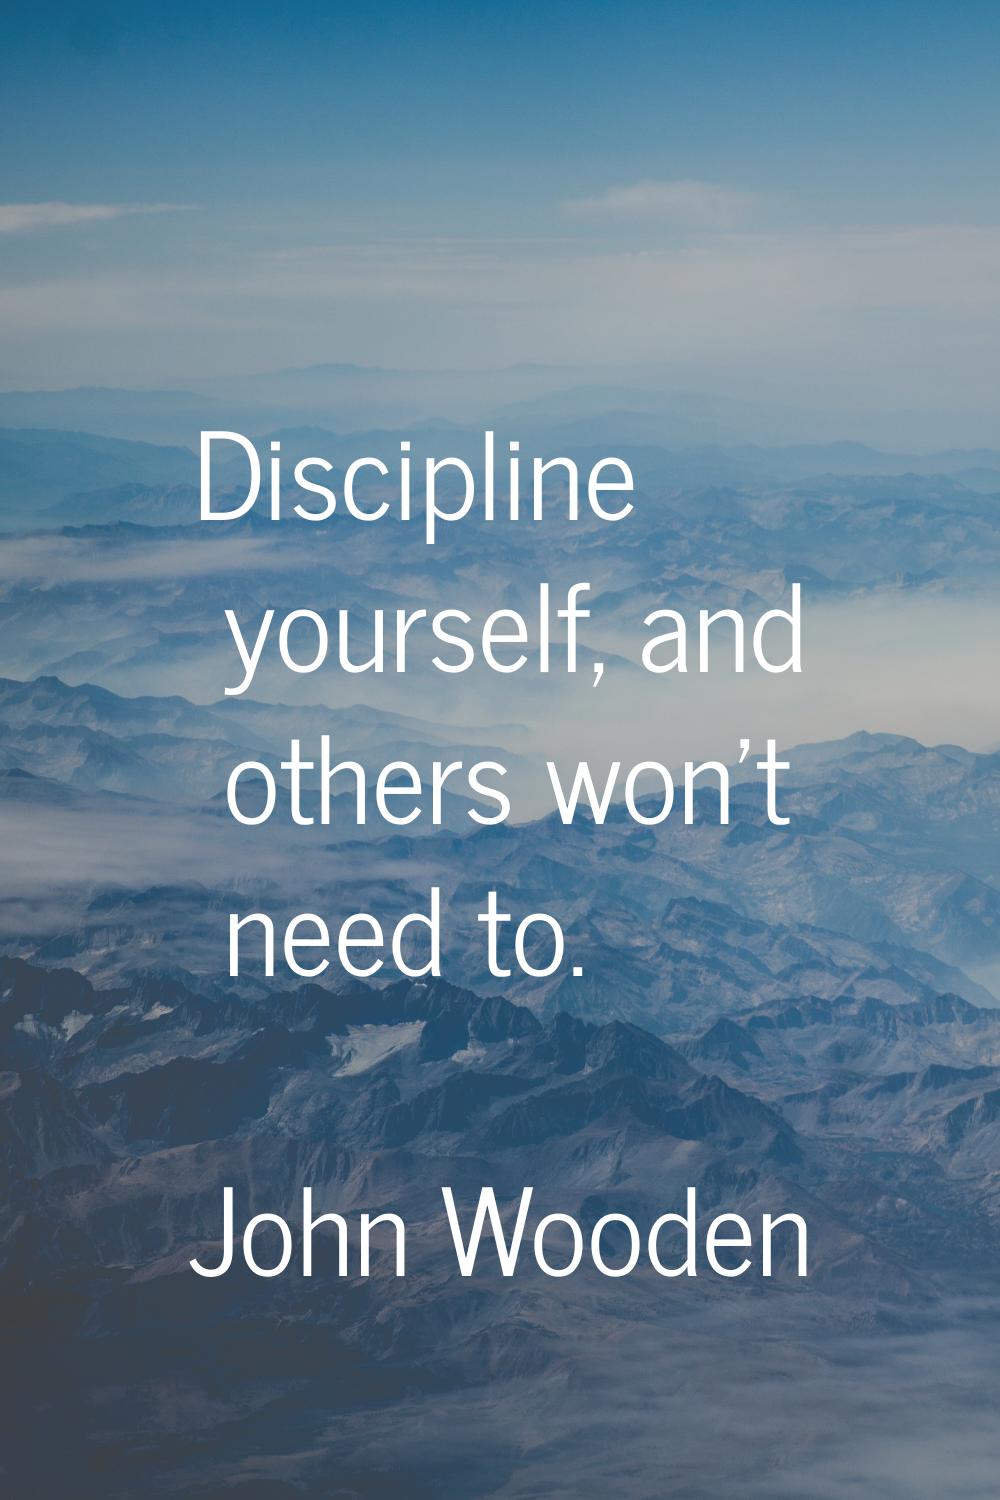 Discipline yourself, and others won't need to.